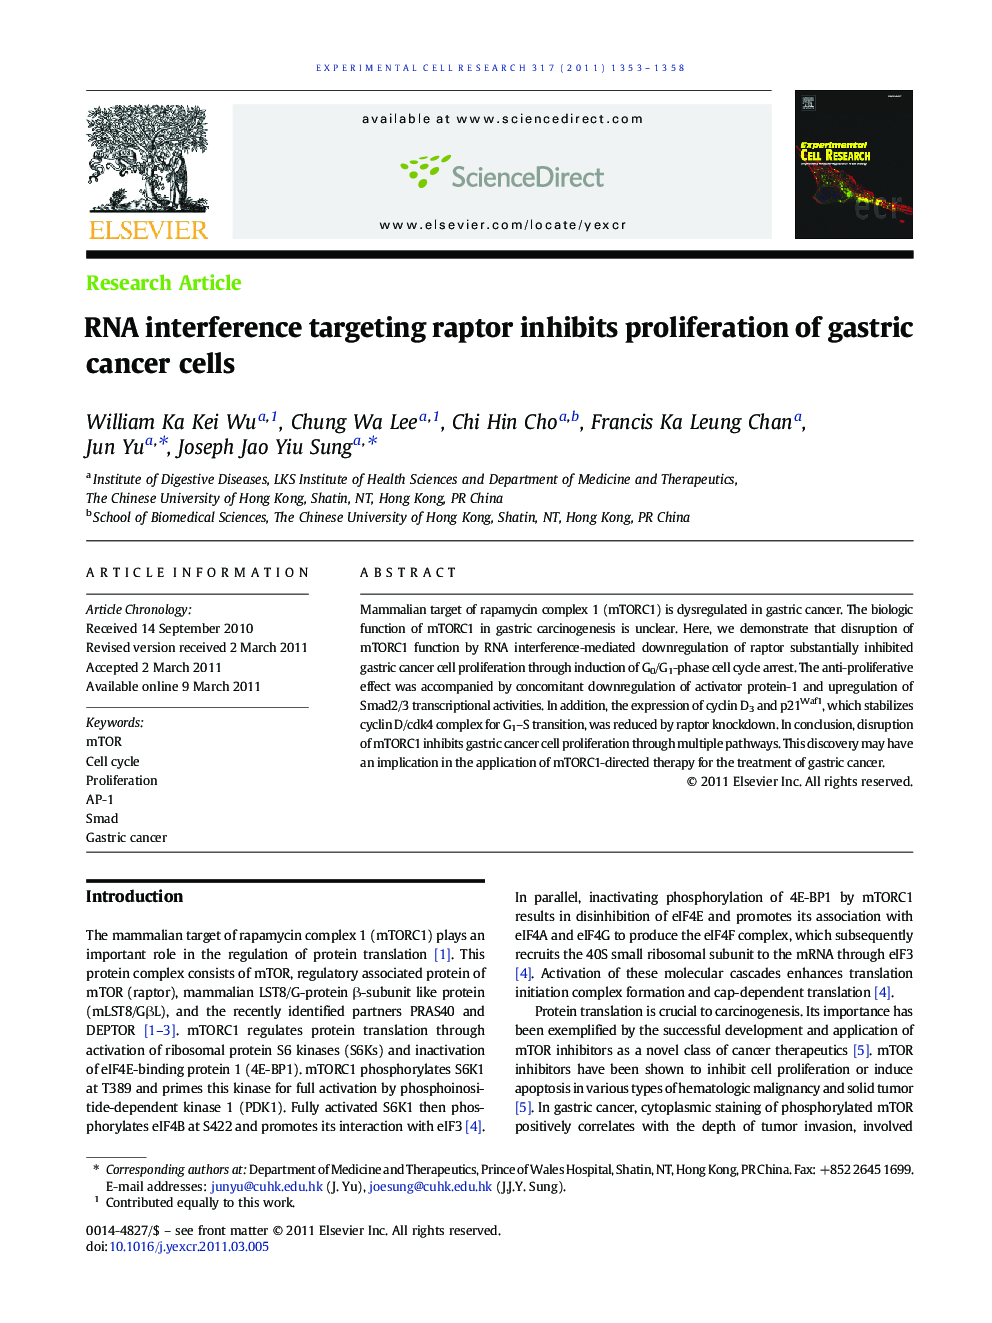 RNA interference targeting raptor inhibits proliferation of gastric cancer cells